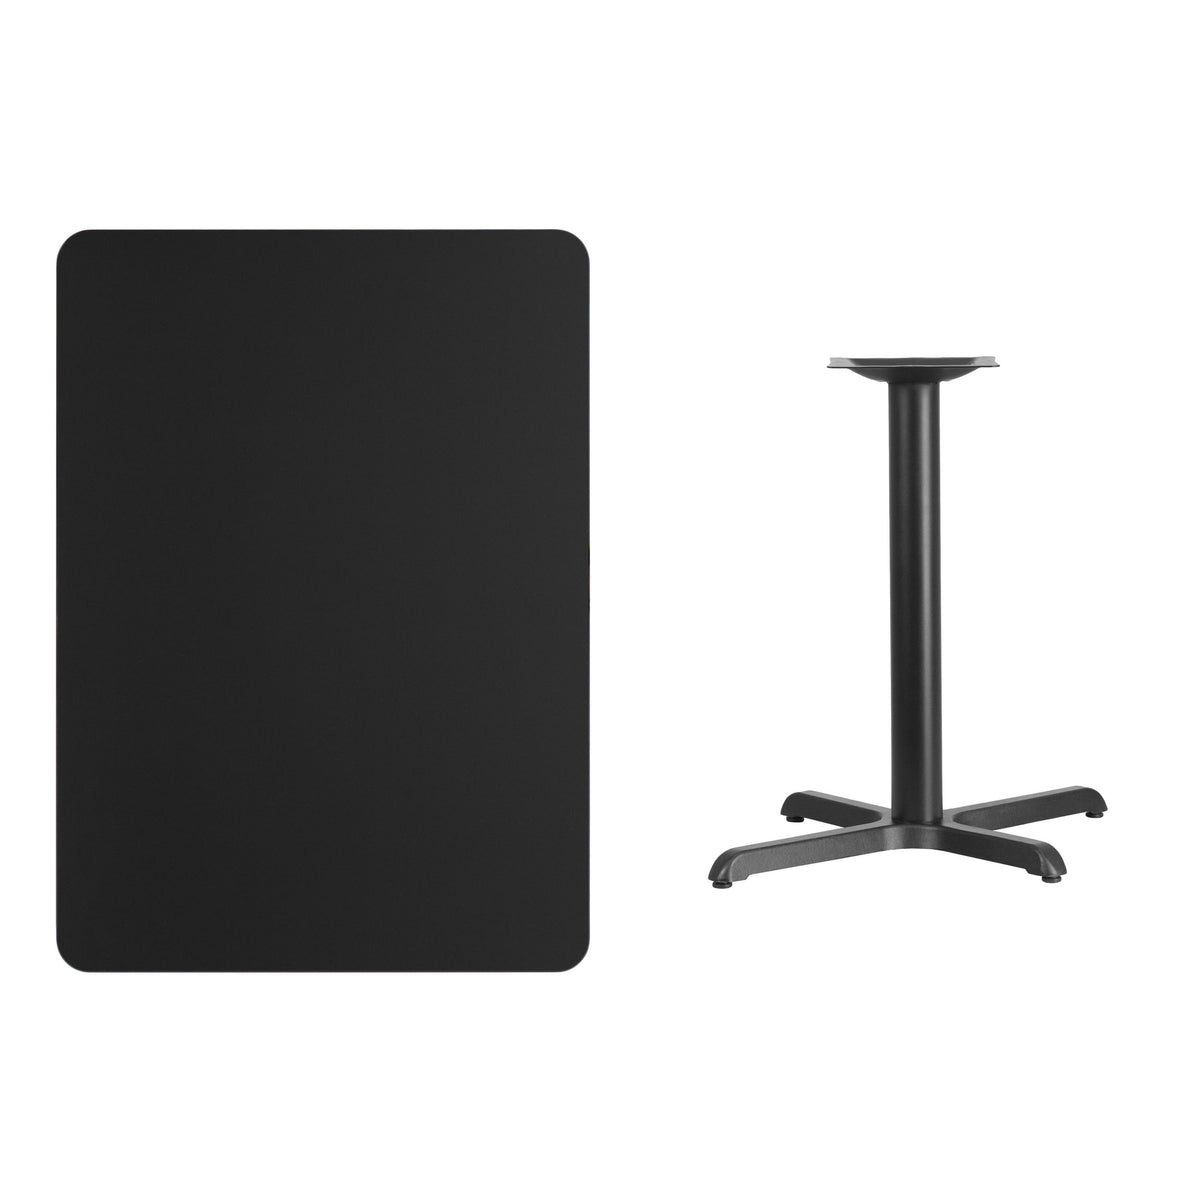 Black |#| 30inch x 42inch Rectangular Laminate Table Top with 23.5inch x 29.5inch Table Height Base